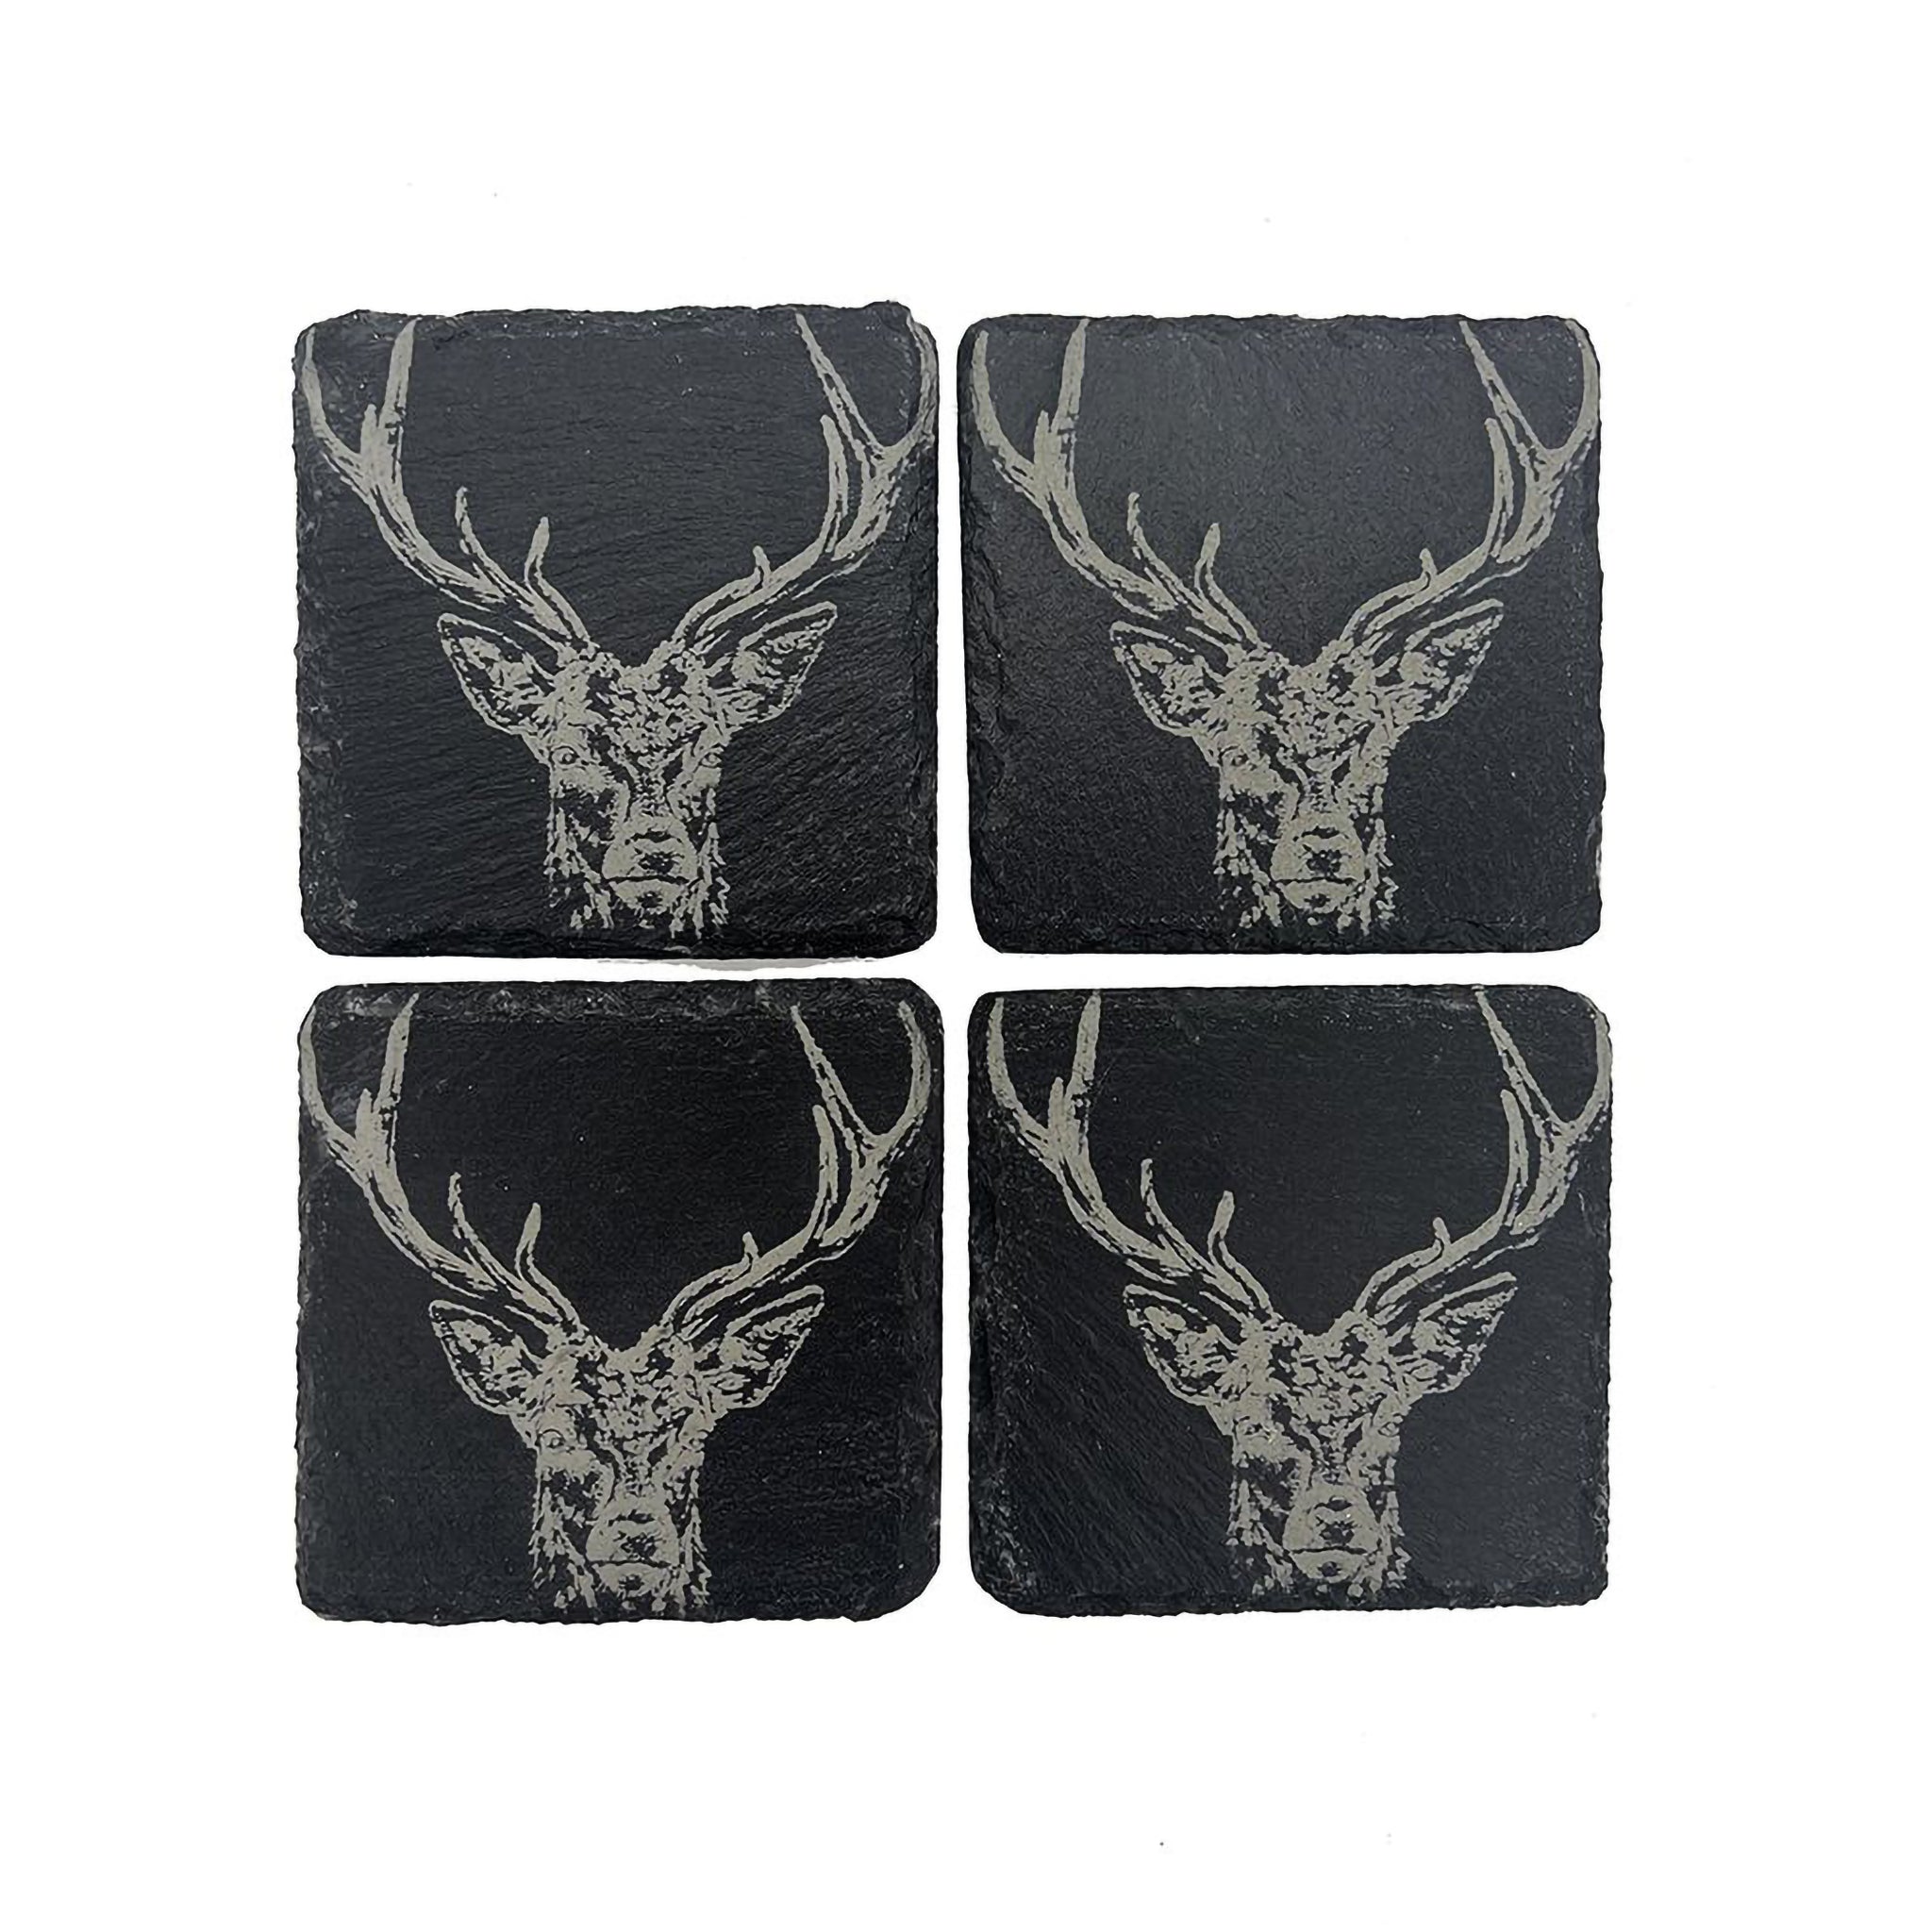 Four square slate coasters with an engraved stag head on each